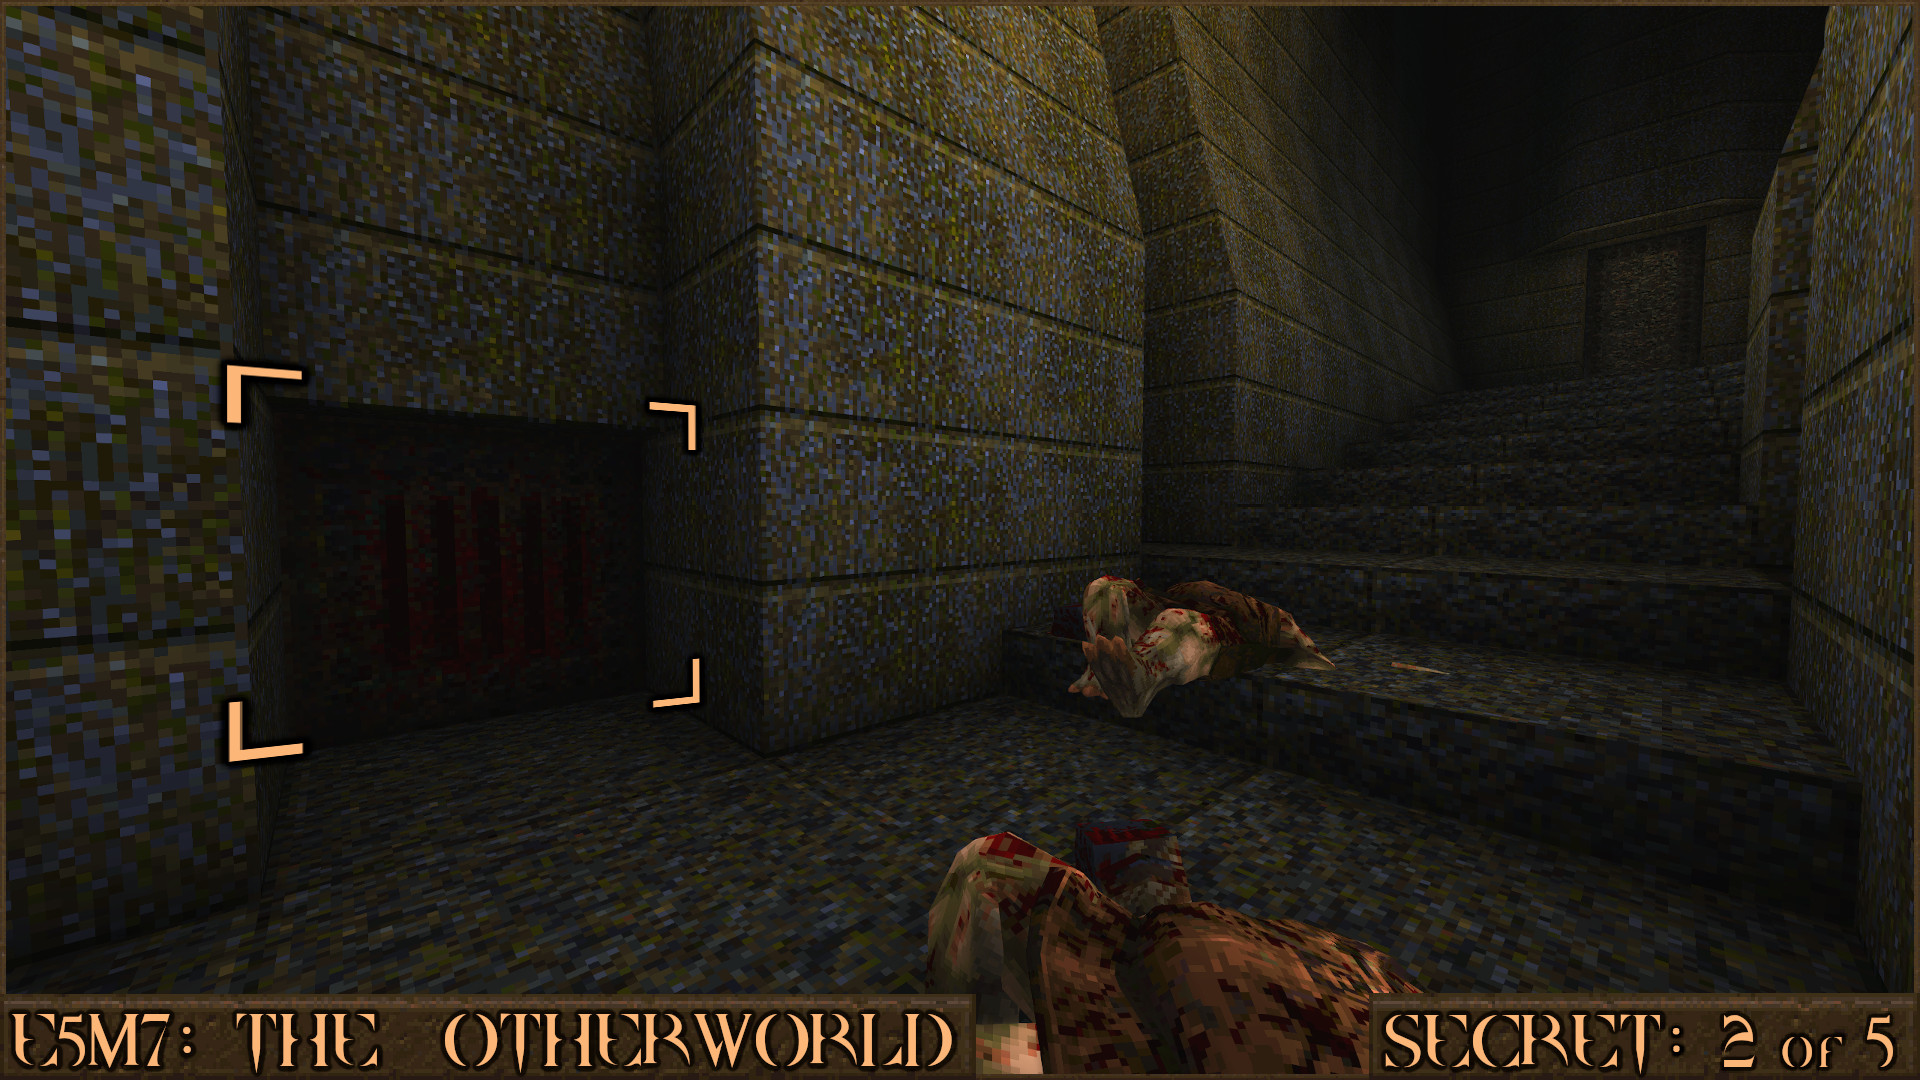 Quake Finding All Secrets in Quake Expansion pack: Dimension of the Past - E5M7: The Otherworld - 5FC2D40